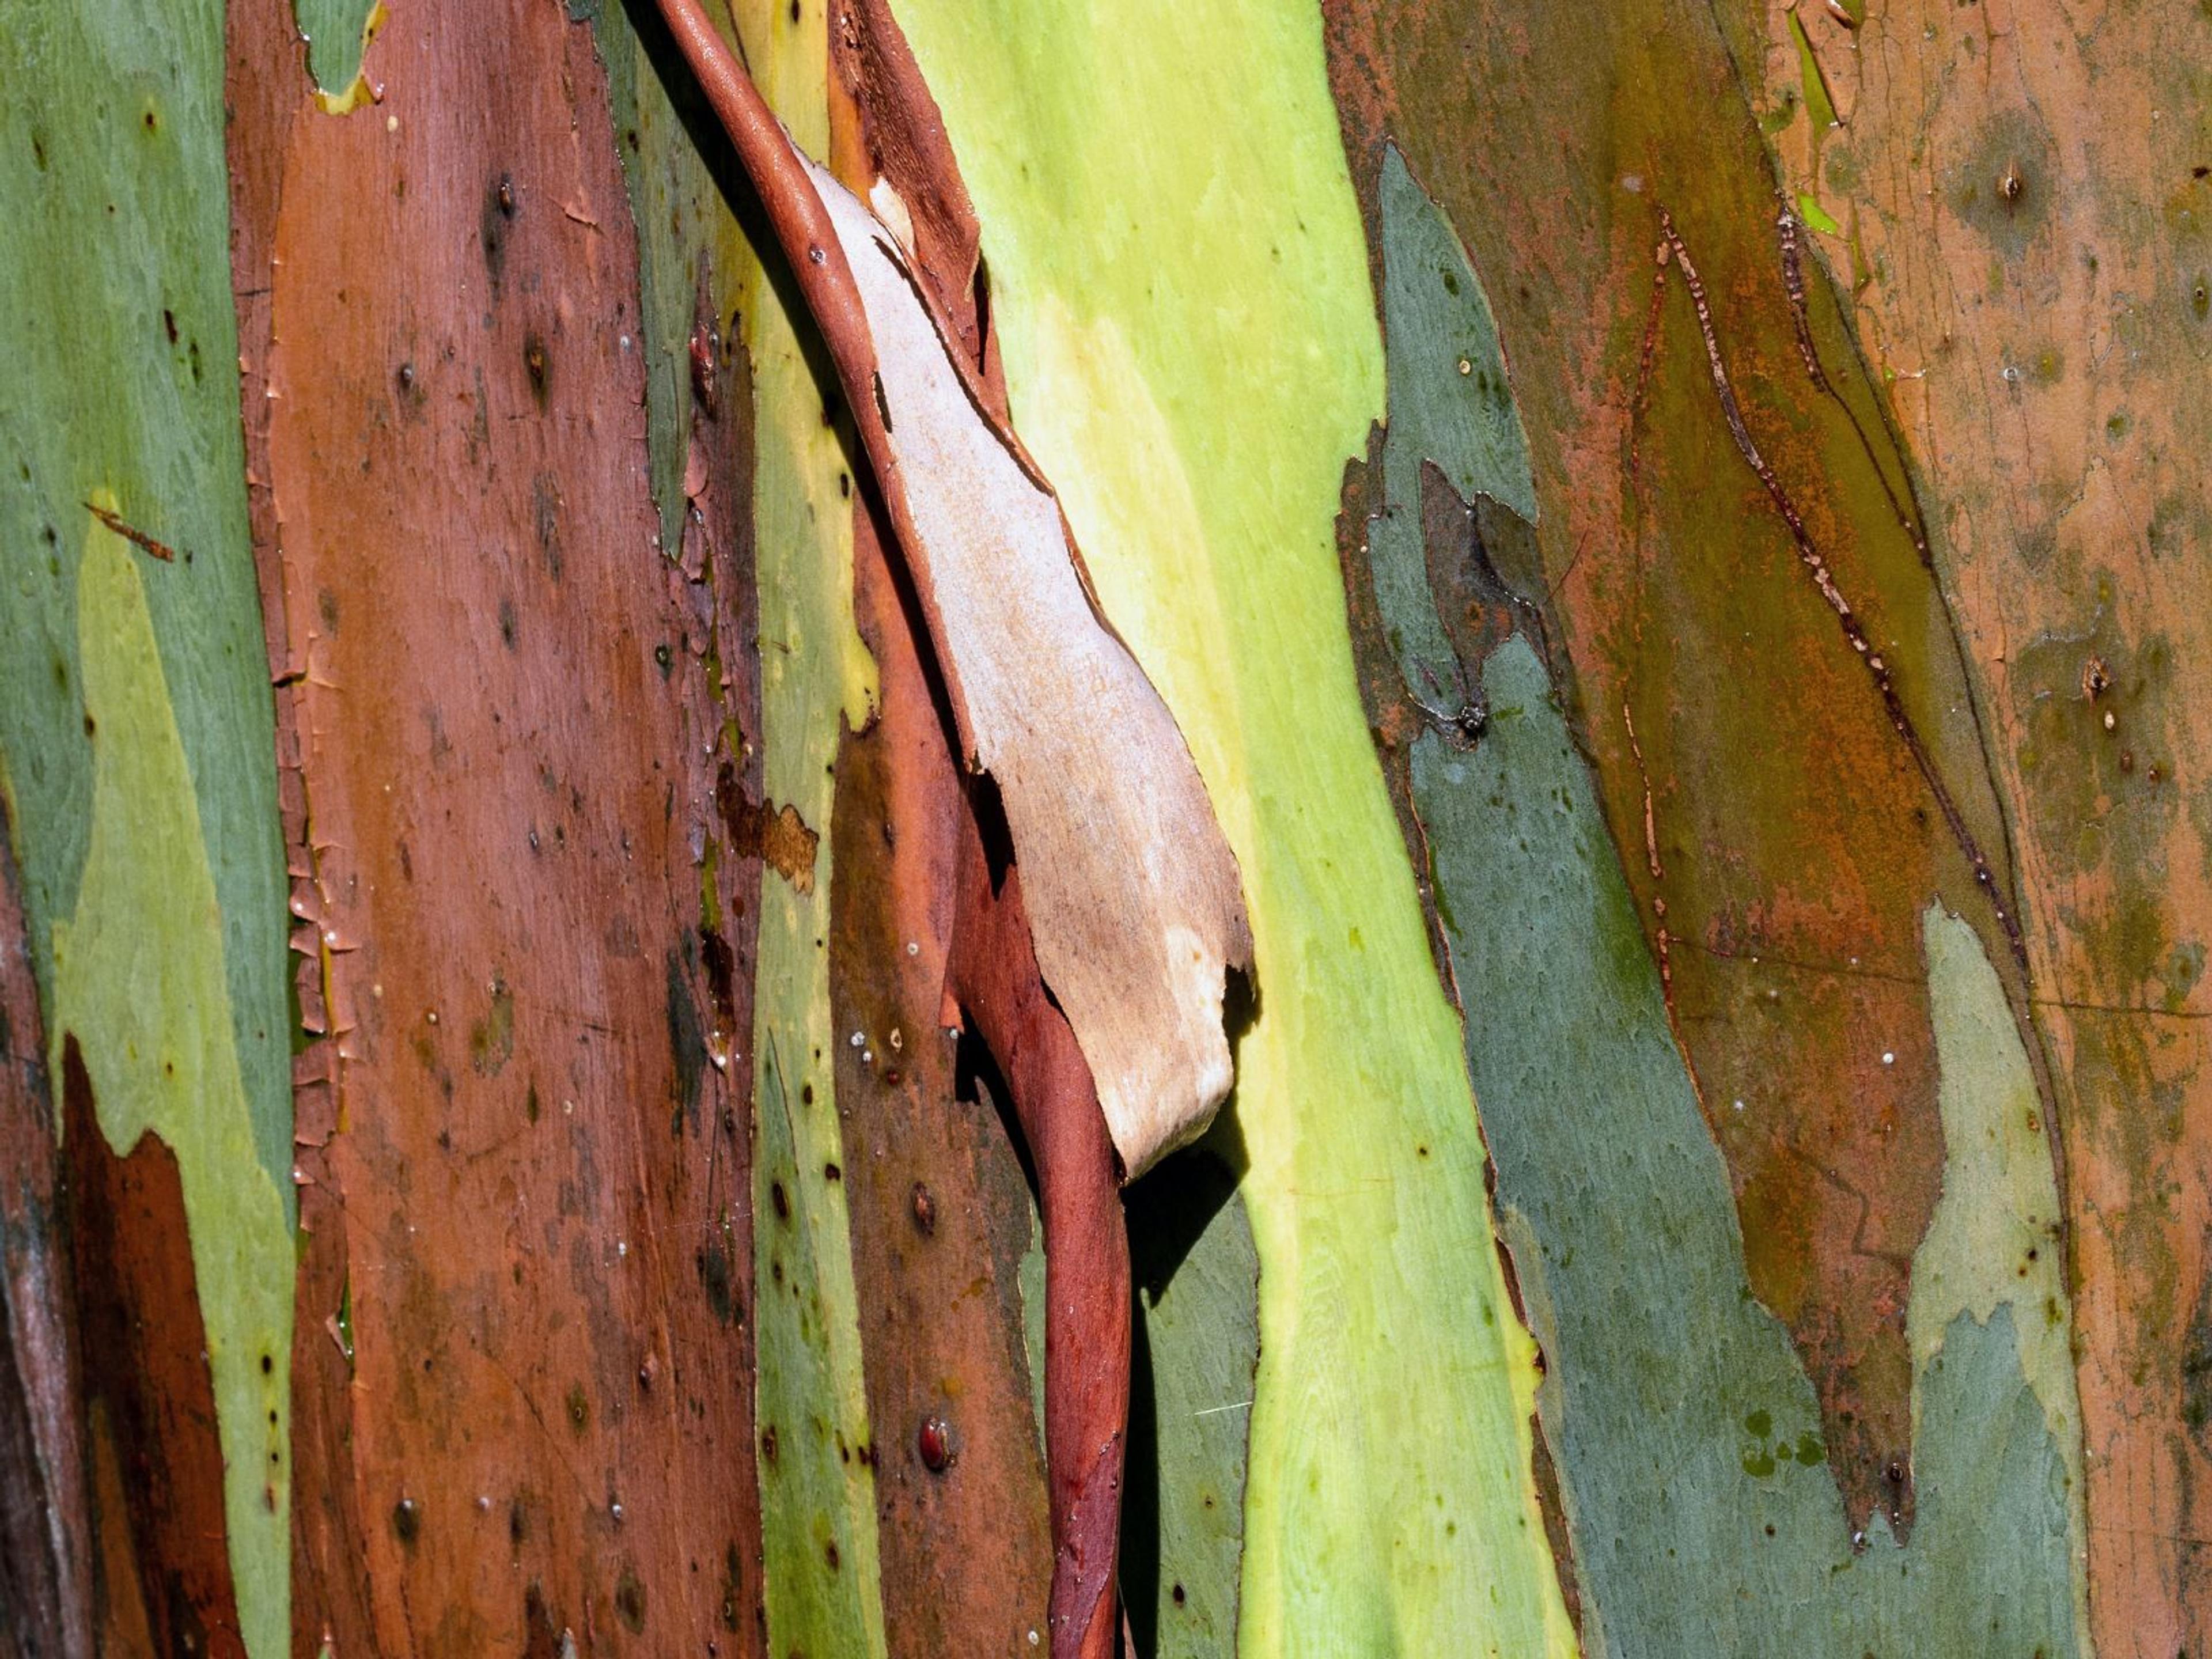 The bark of a gum tree.